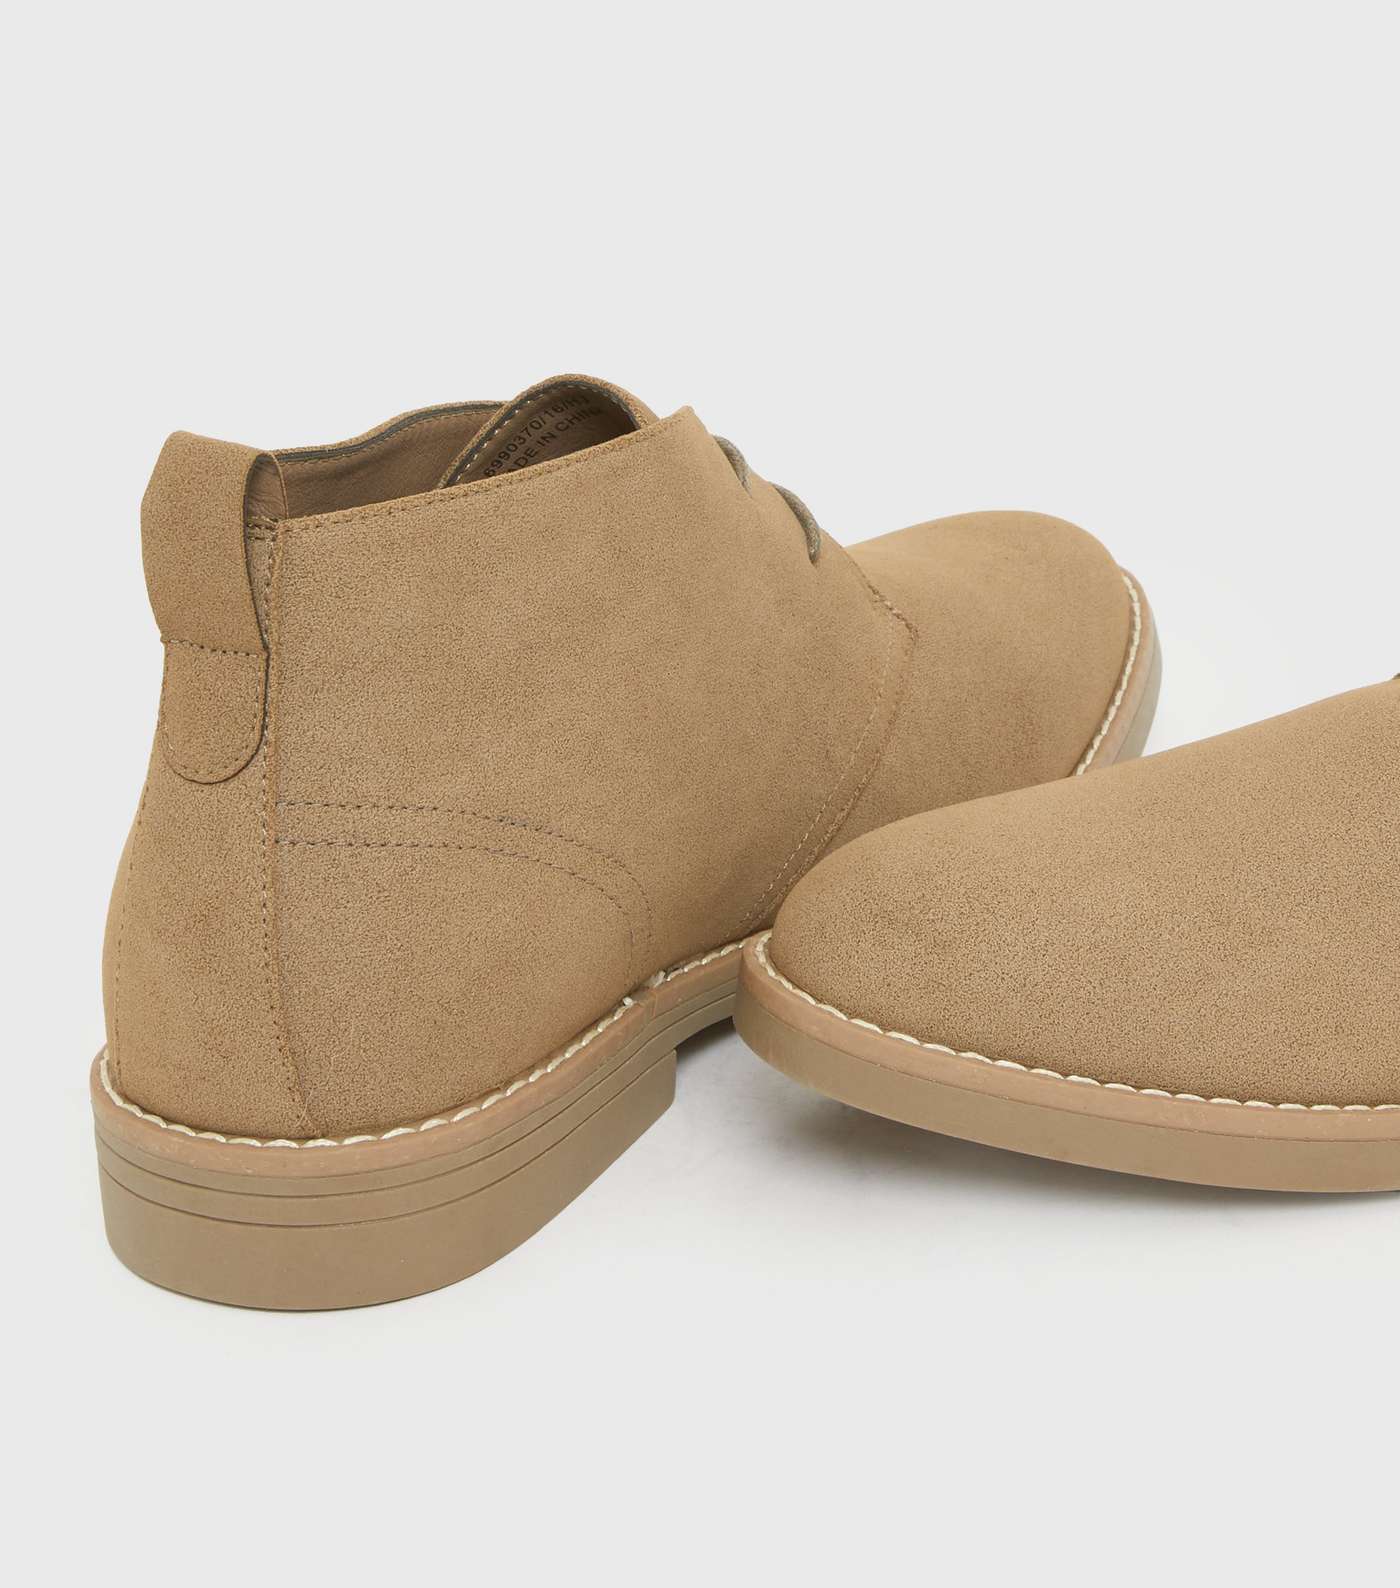 Stone Suedette Round Toe Lace Up Desert Boots Image 4